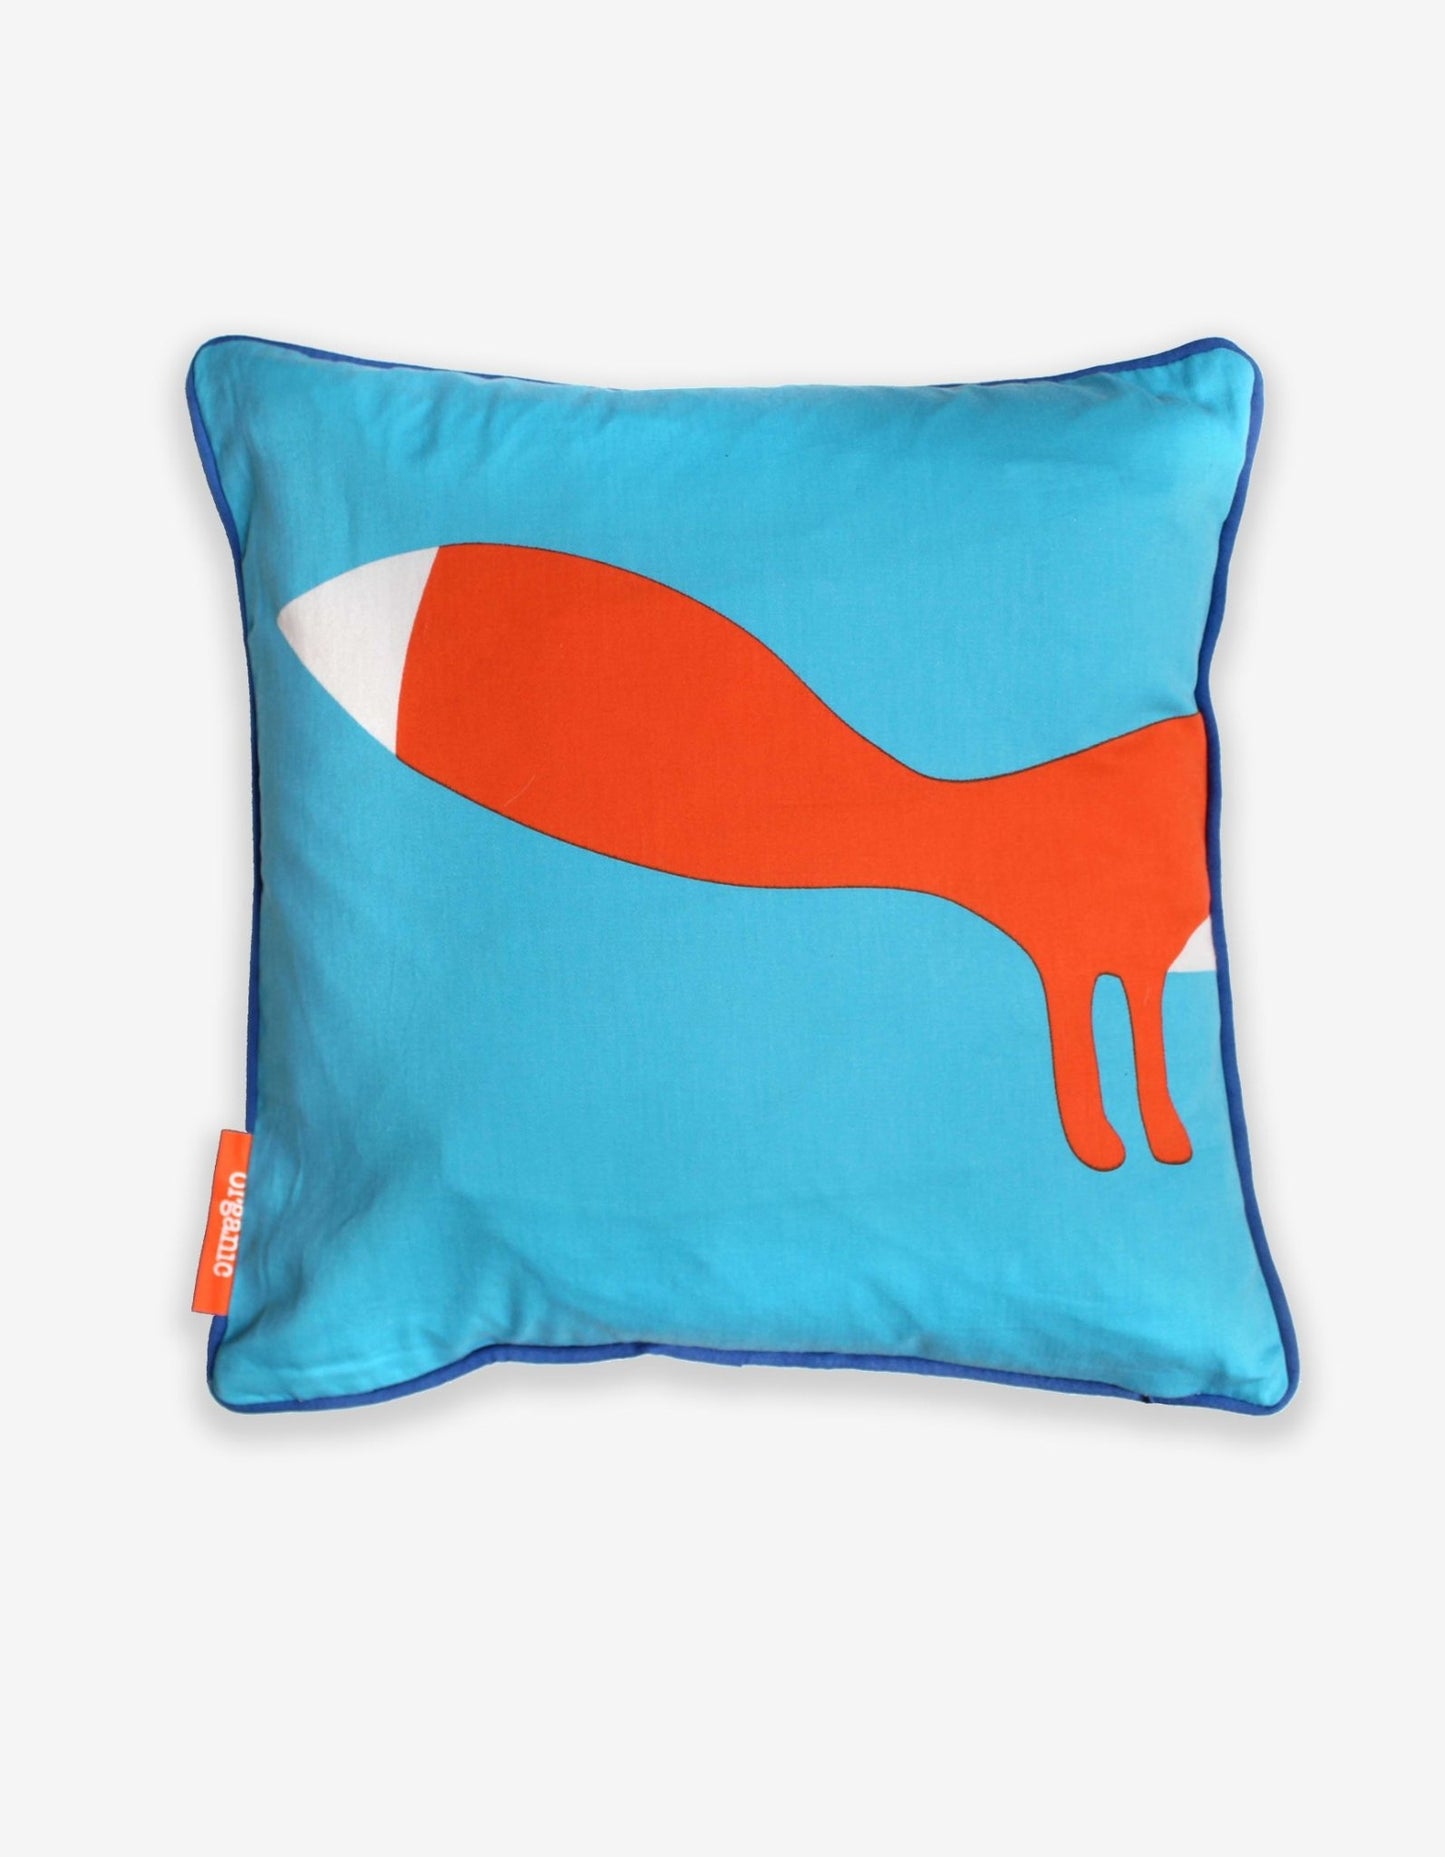 Blue Fox Cushion Cover - Toby Tiger